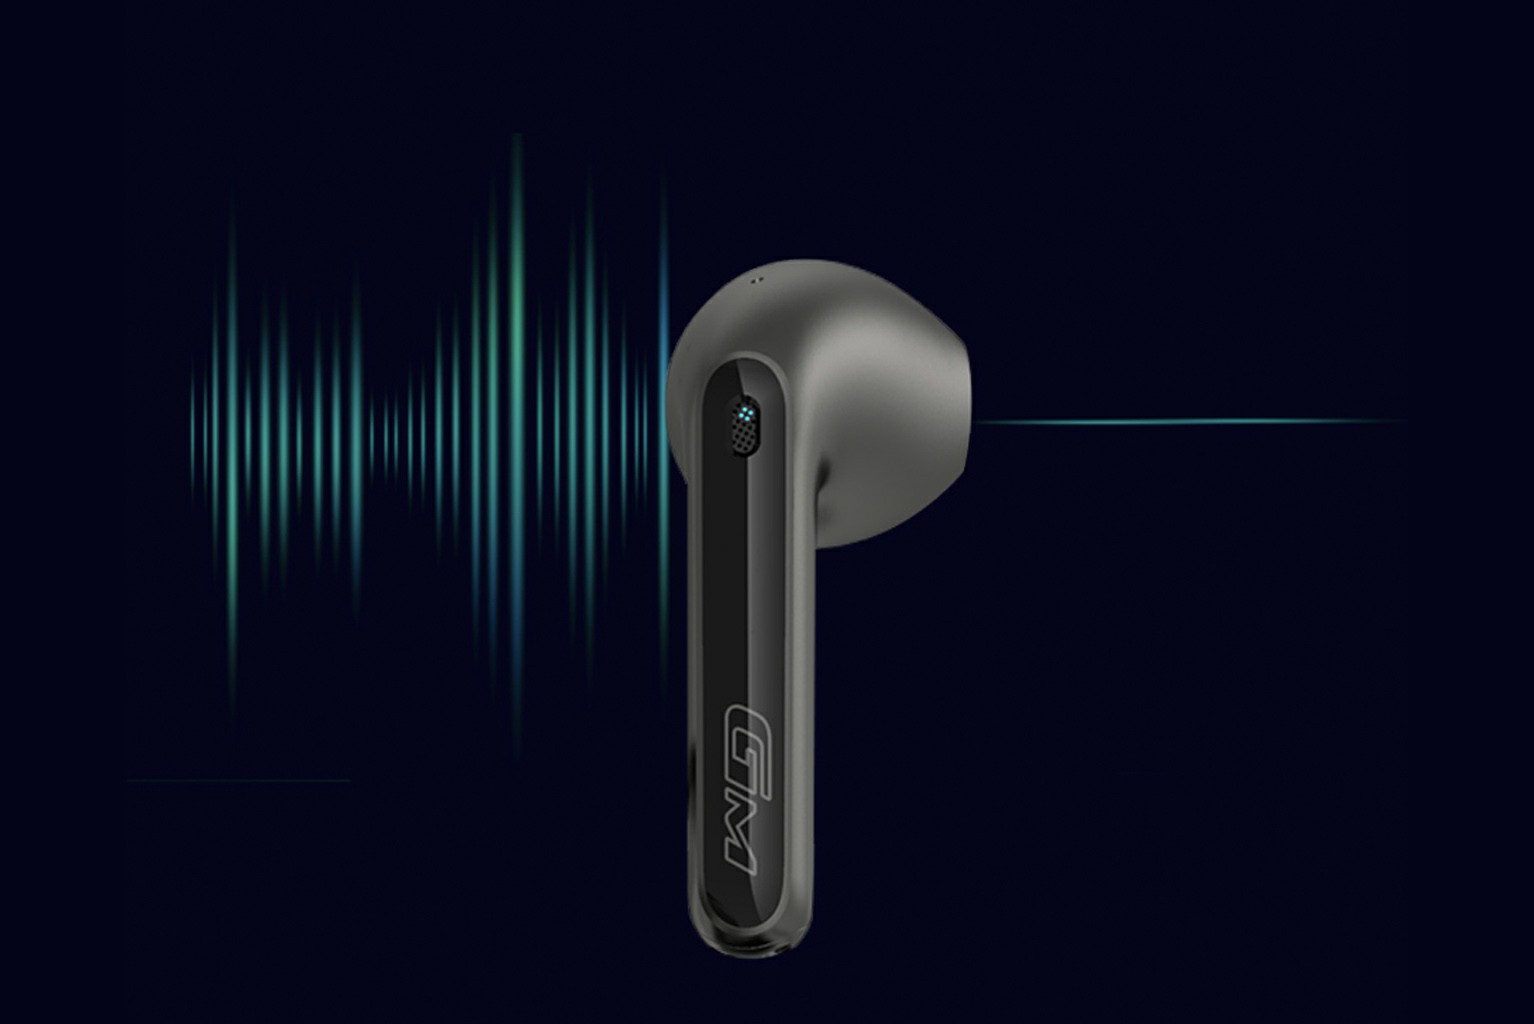 EDIFIER GM5 GAMING EARBUDS Bluetooth v5.2, Qualcomm QCC3046 and aptX Adaptive low latency technol-ogy, for faster transmission and a more stable connection.